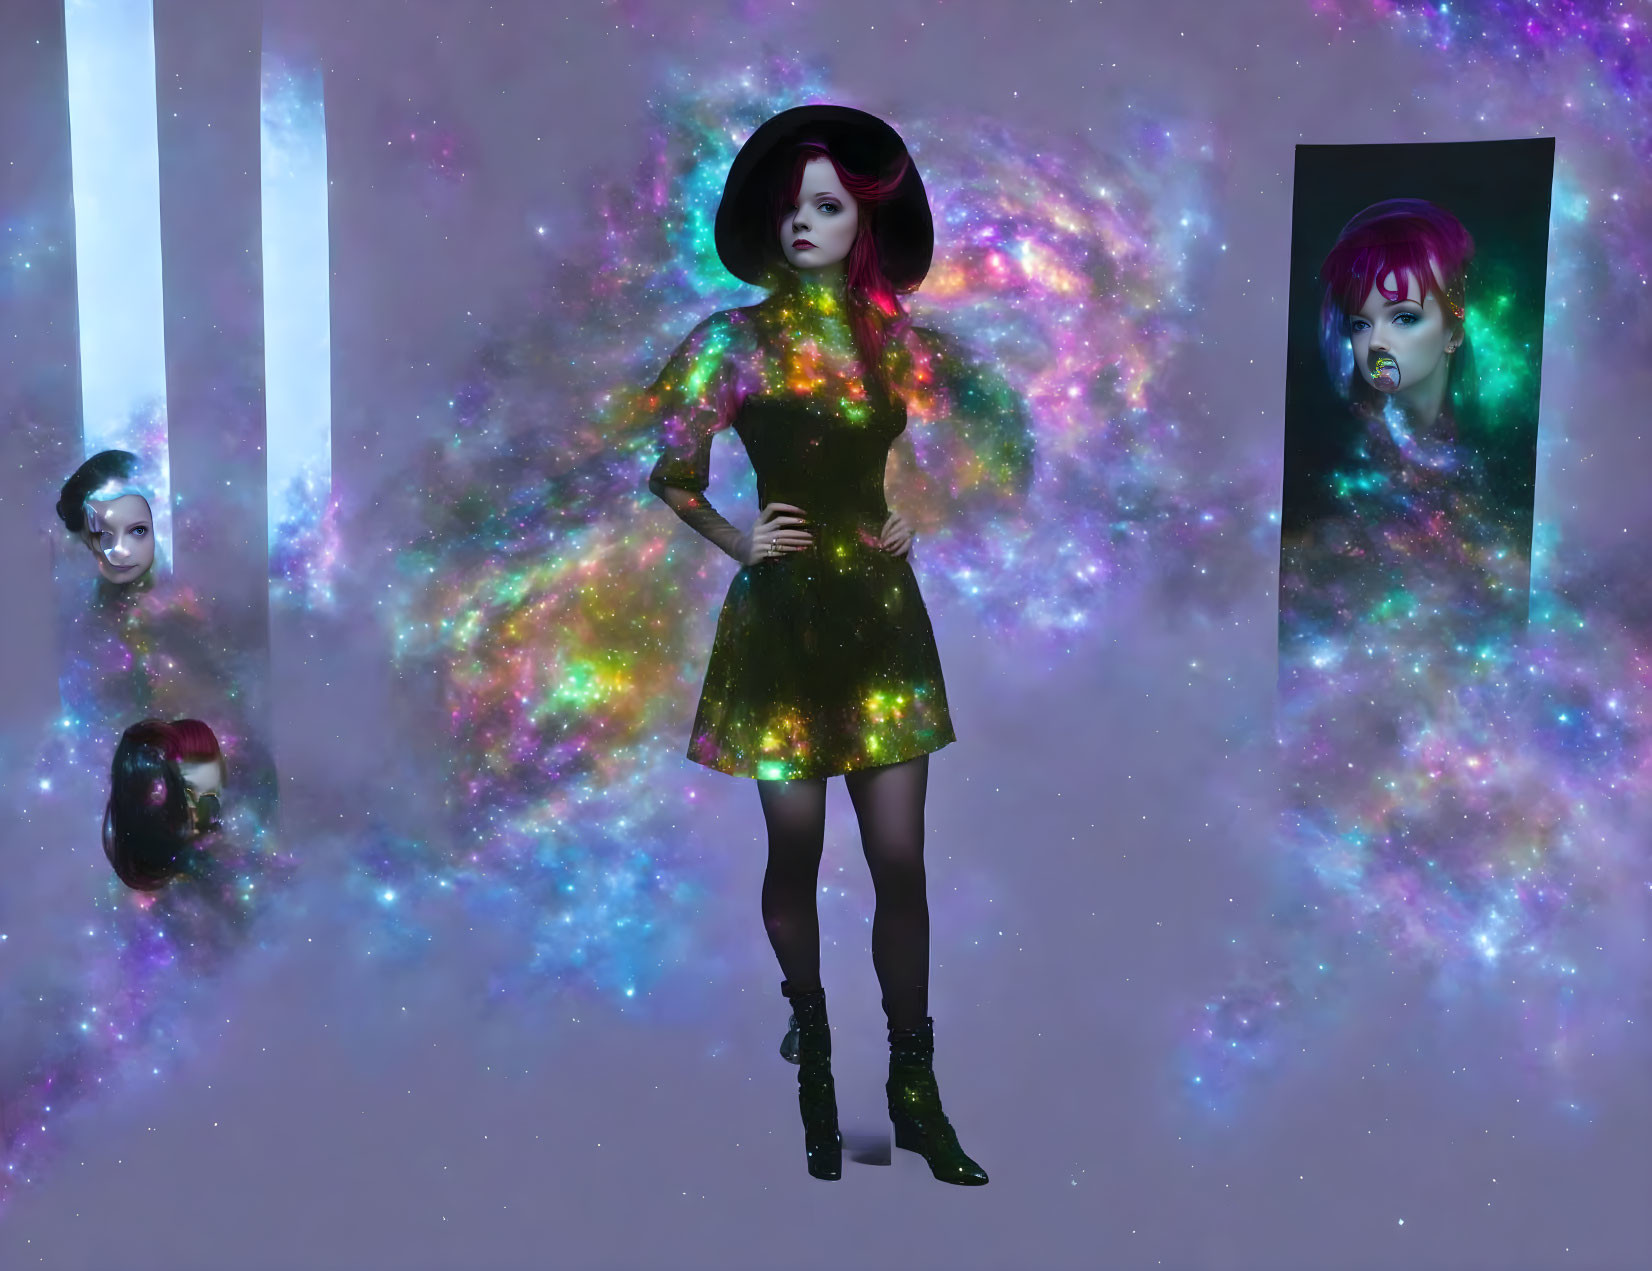 Gothic-style female character with cosmic patterns in nebula setting